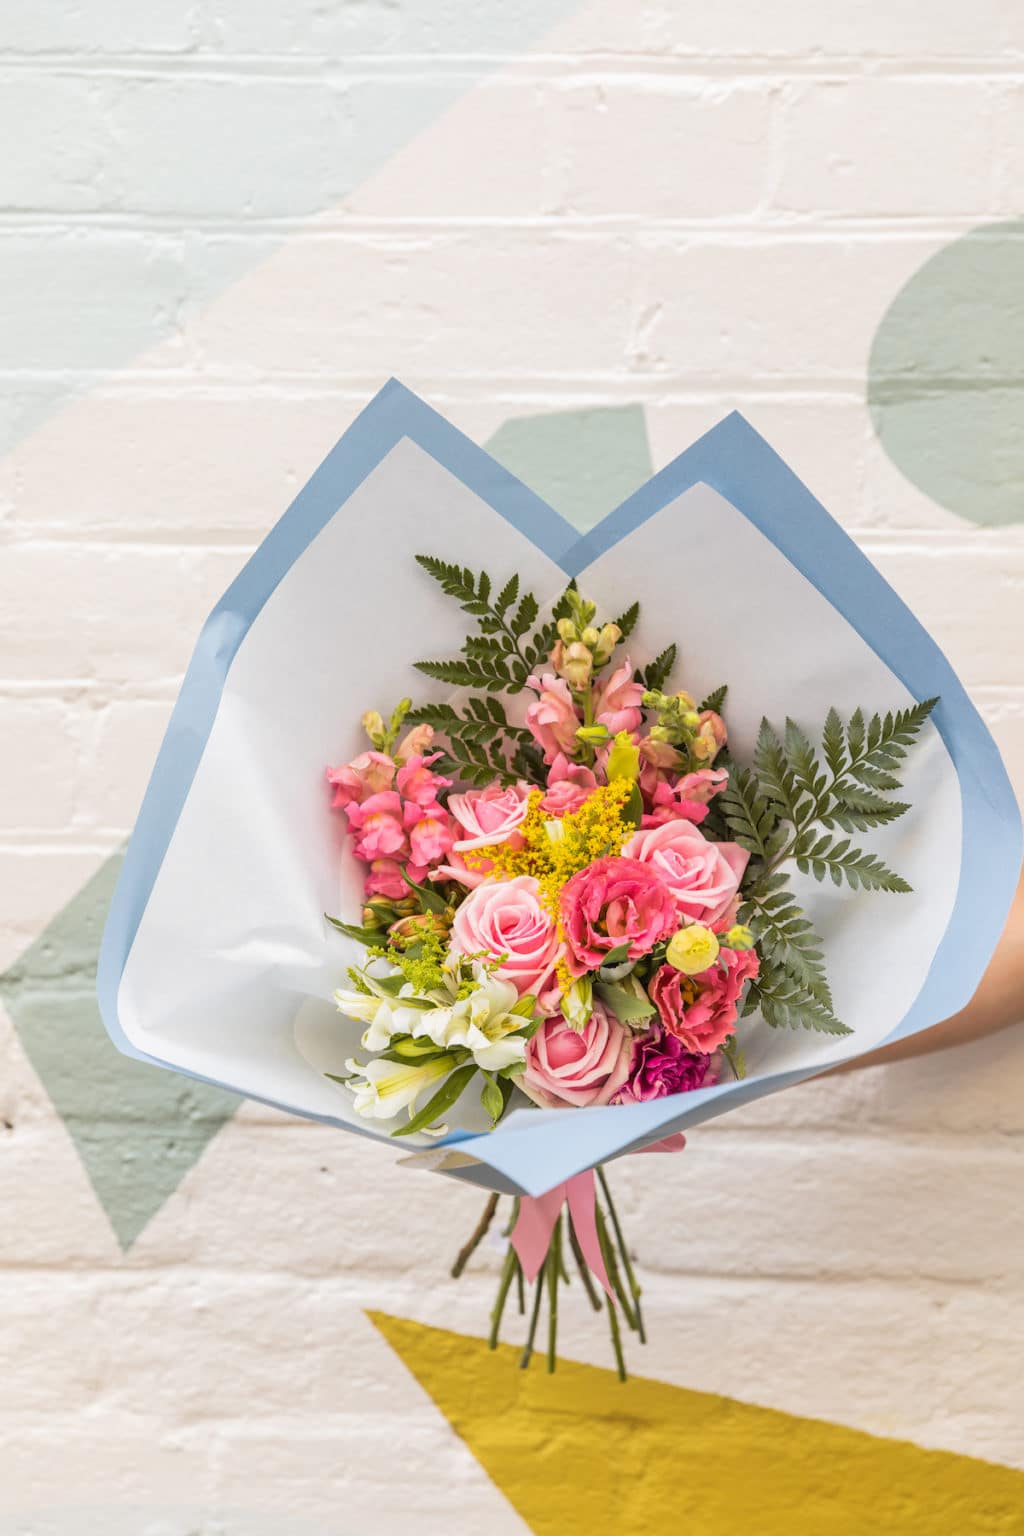 Bouquet of fresh seasonal flowers available for delivery in Wagga Wagga, from our boutique, florist shop.